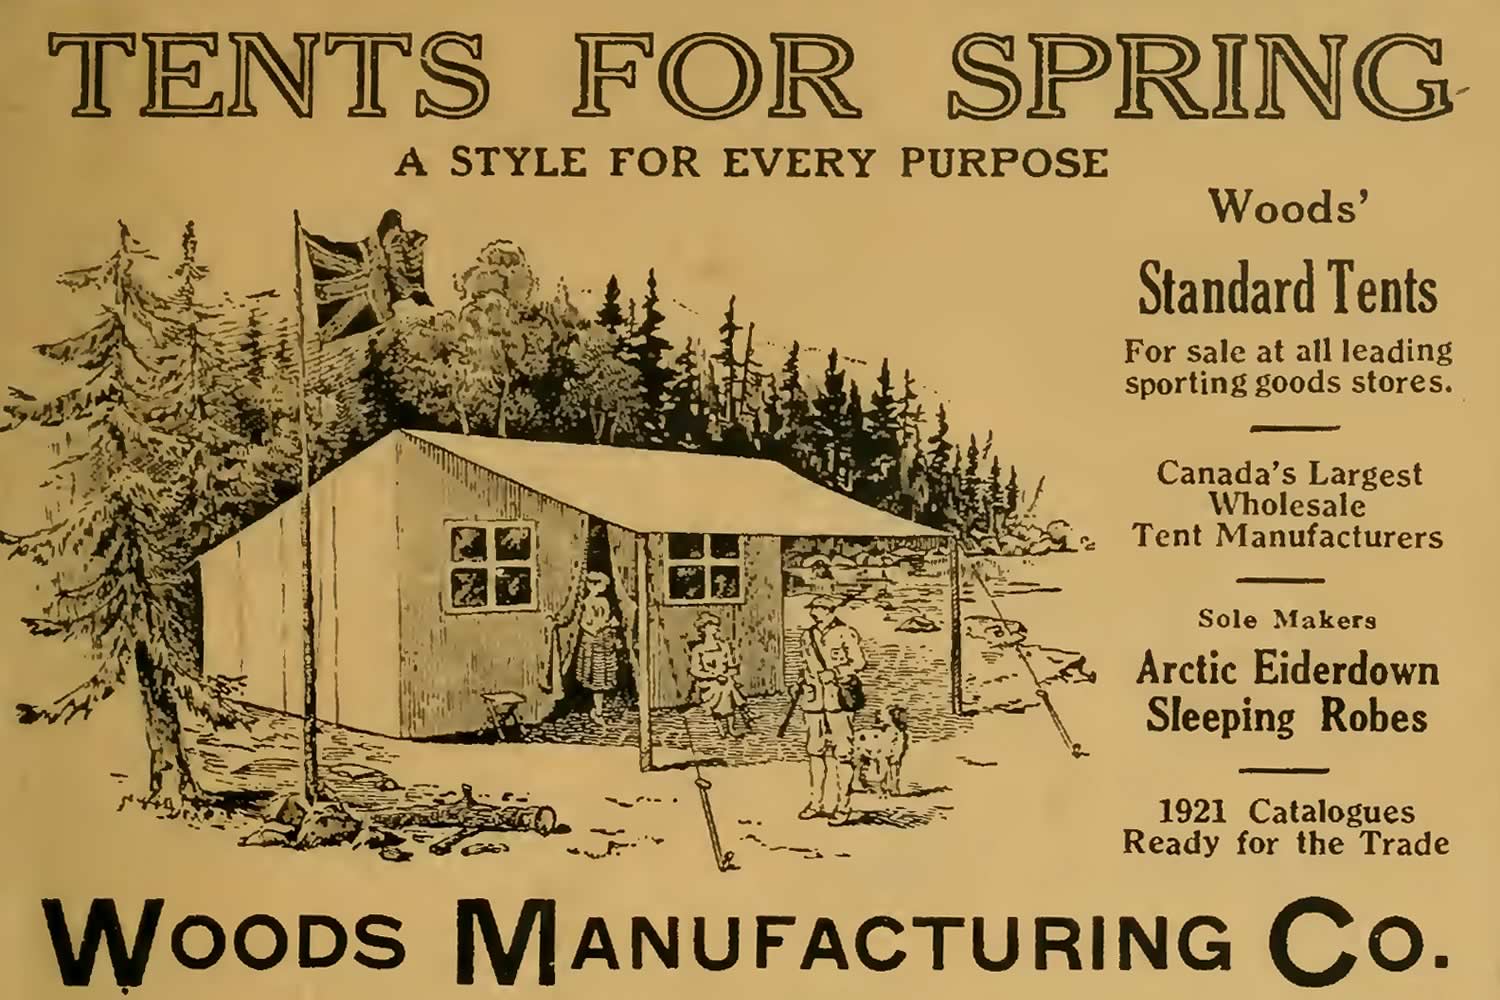 Black and white image of an advertisement for Woods Manufacturing Co. Ltd. tents and sleeping clothes with a prominent illustration of a family in a tent in a pine forest clearing. The text reads: 'Tents for spring: a style for every purpose'.